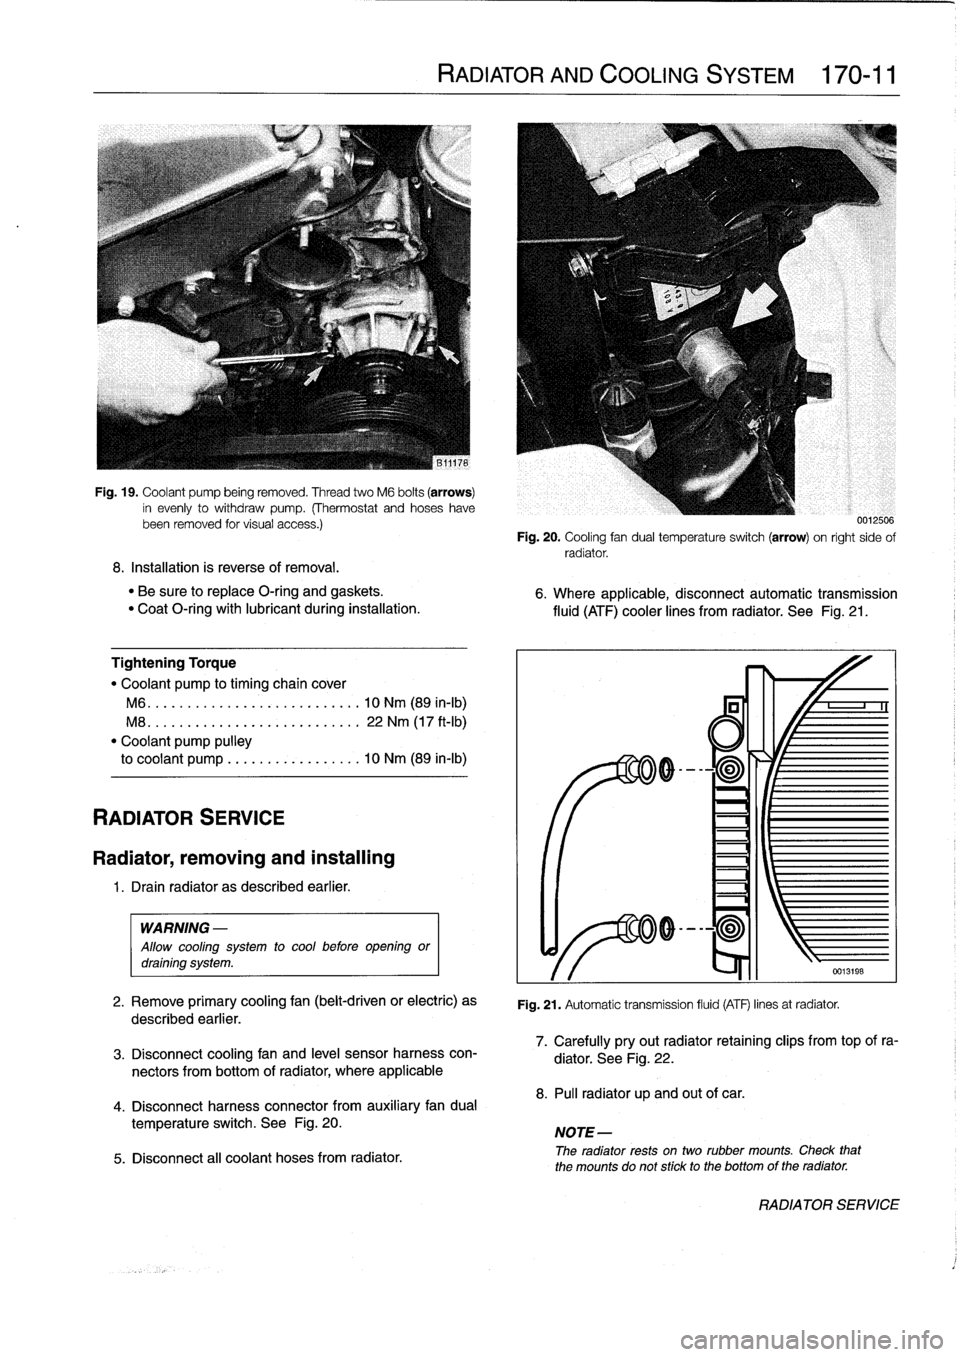 BMW 328i 1997 E36 Workshop Manual 
Fig
.
19
.
Coolant
pump
being
removed
.
Thread
two
M6
bolts
(arrows)
in
evenly
to
withdraw
pump
.
(Thermostat
and
hoseshavebeen
removed
tor
visual
access
.)

8
.
Installation
is
reverse
of
removal
.
